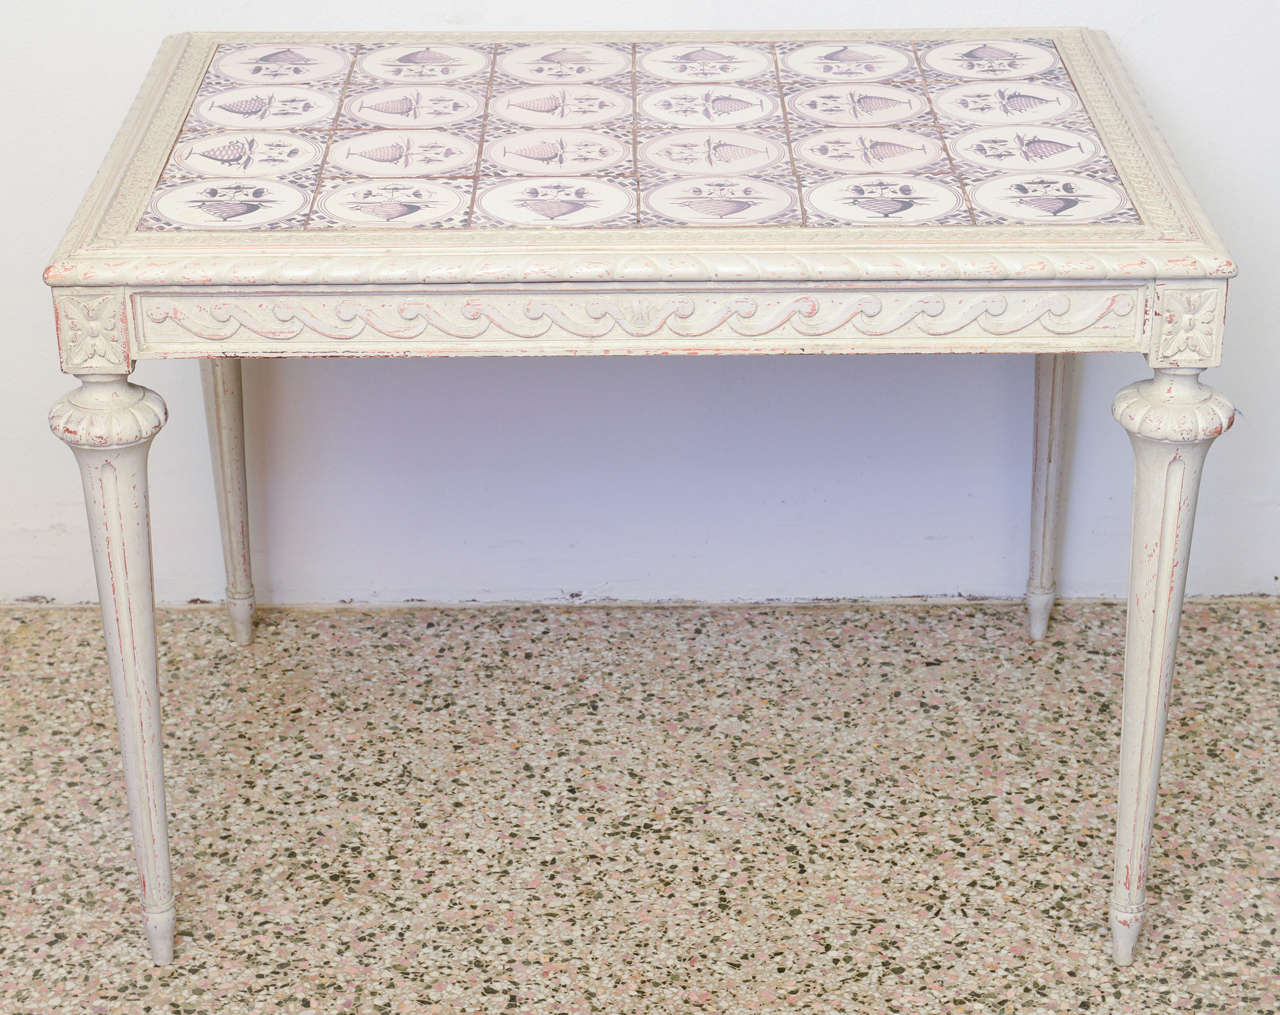 19th Century Swedish Antique Table with Ceramic Tile Top In Good Condition For Sale In West Palm Beach, FL